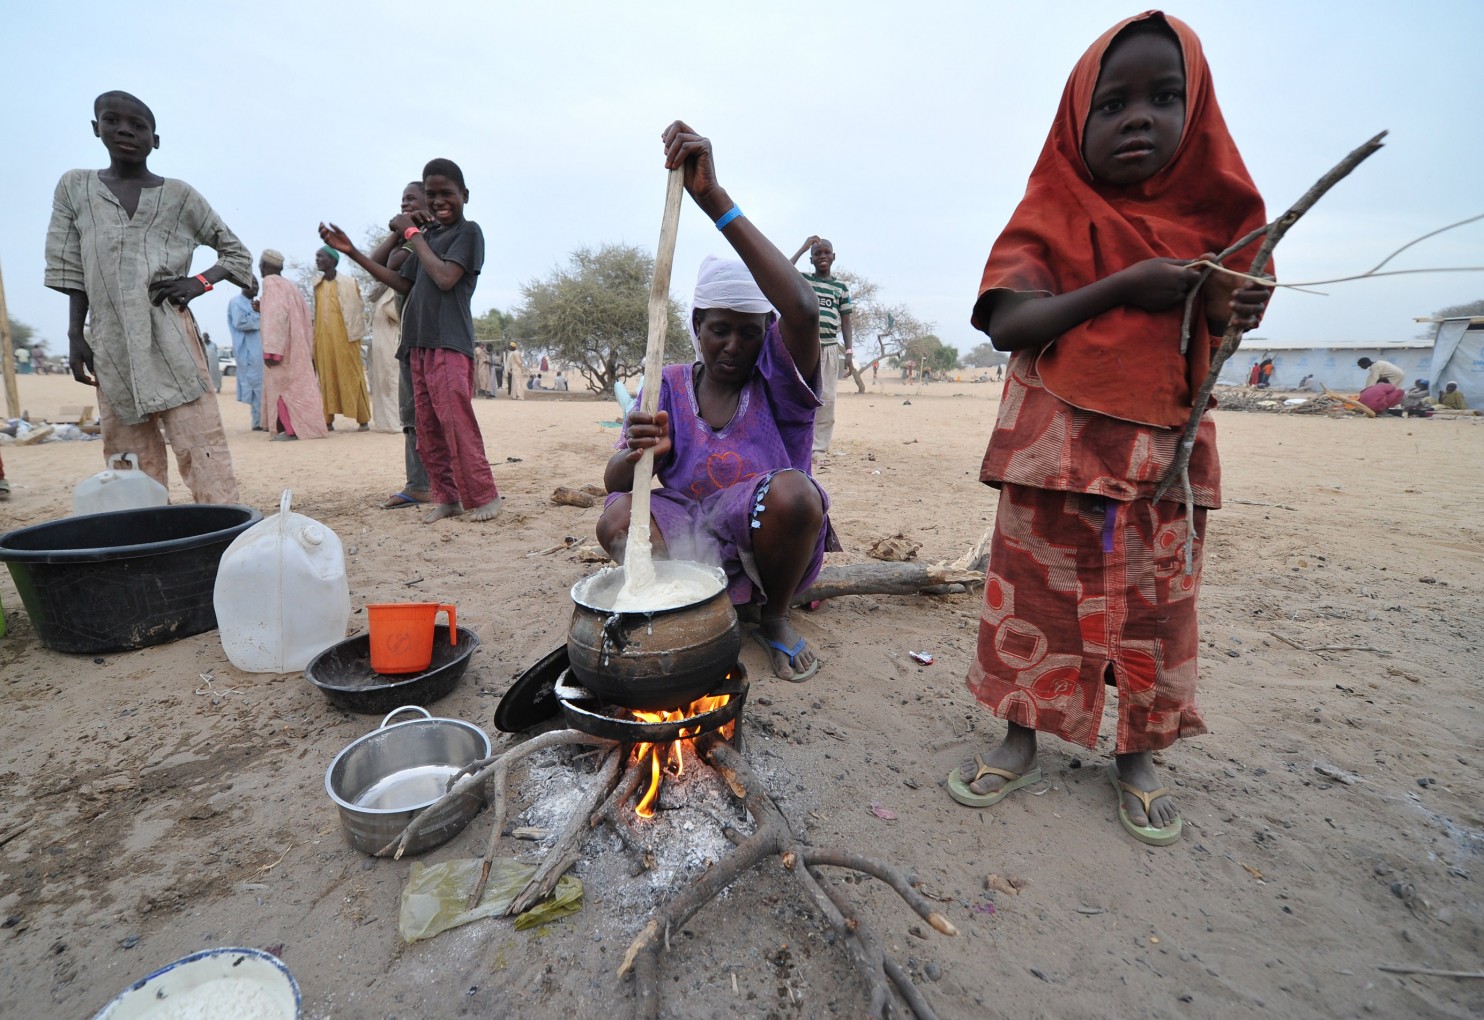 Nigerian refugees prepare food and go about their daily lives at a United Nations High Commission for Refugees (UNHCR) camp in Baga Sola on January 29, 2015. The refugees arrived in the camp after the attack by Boko Haram millitants in the Nigerian town of Baga. (Sia Kambou/AFP/Getty Images)